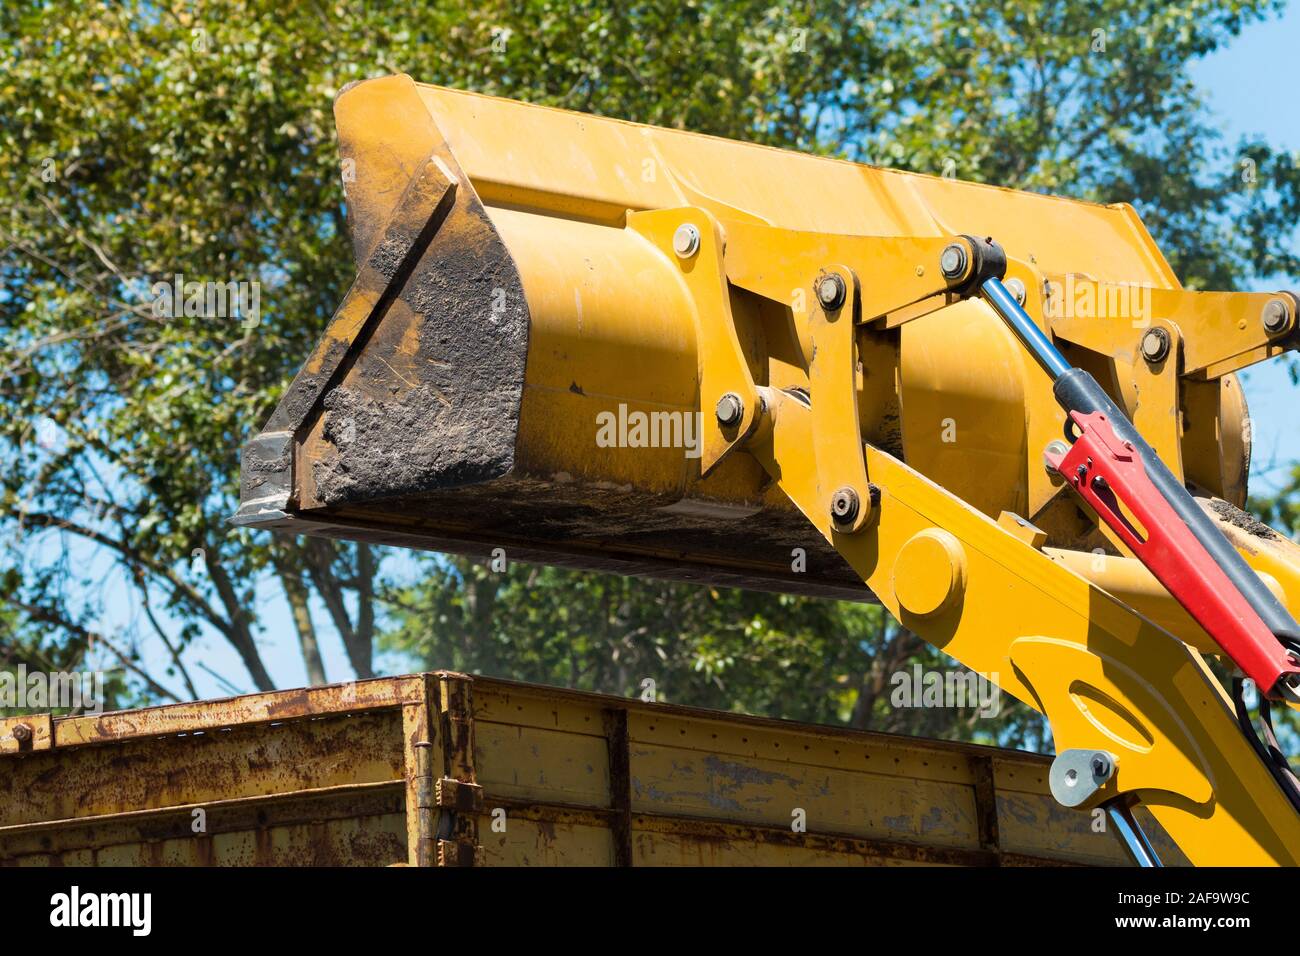 digger or excavator bucket or shovel raised up above a truck or lorry during construction, concept building industry machinery Stock Photo